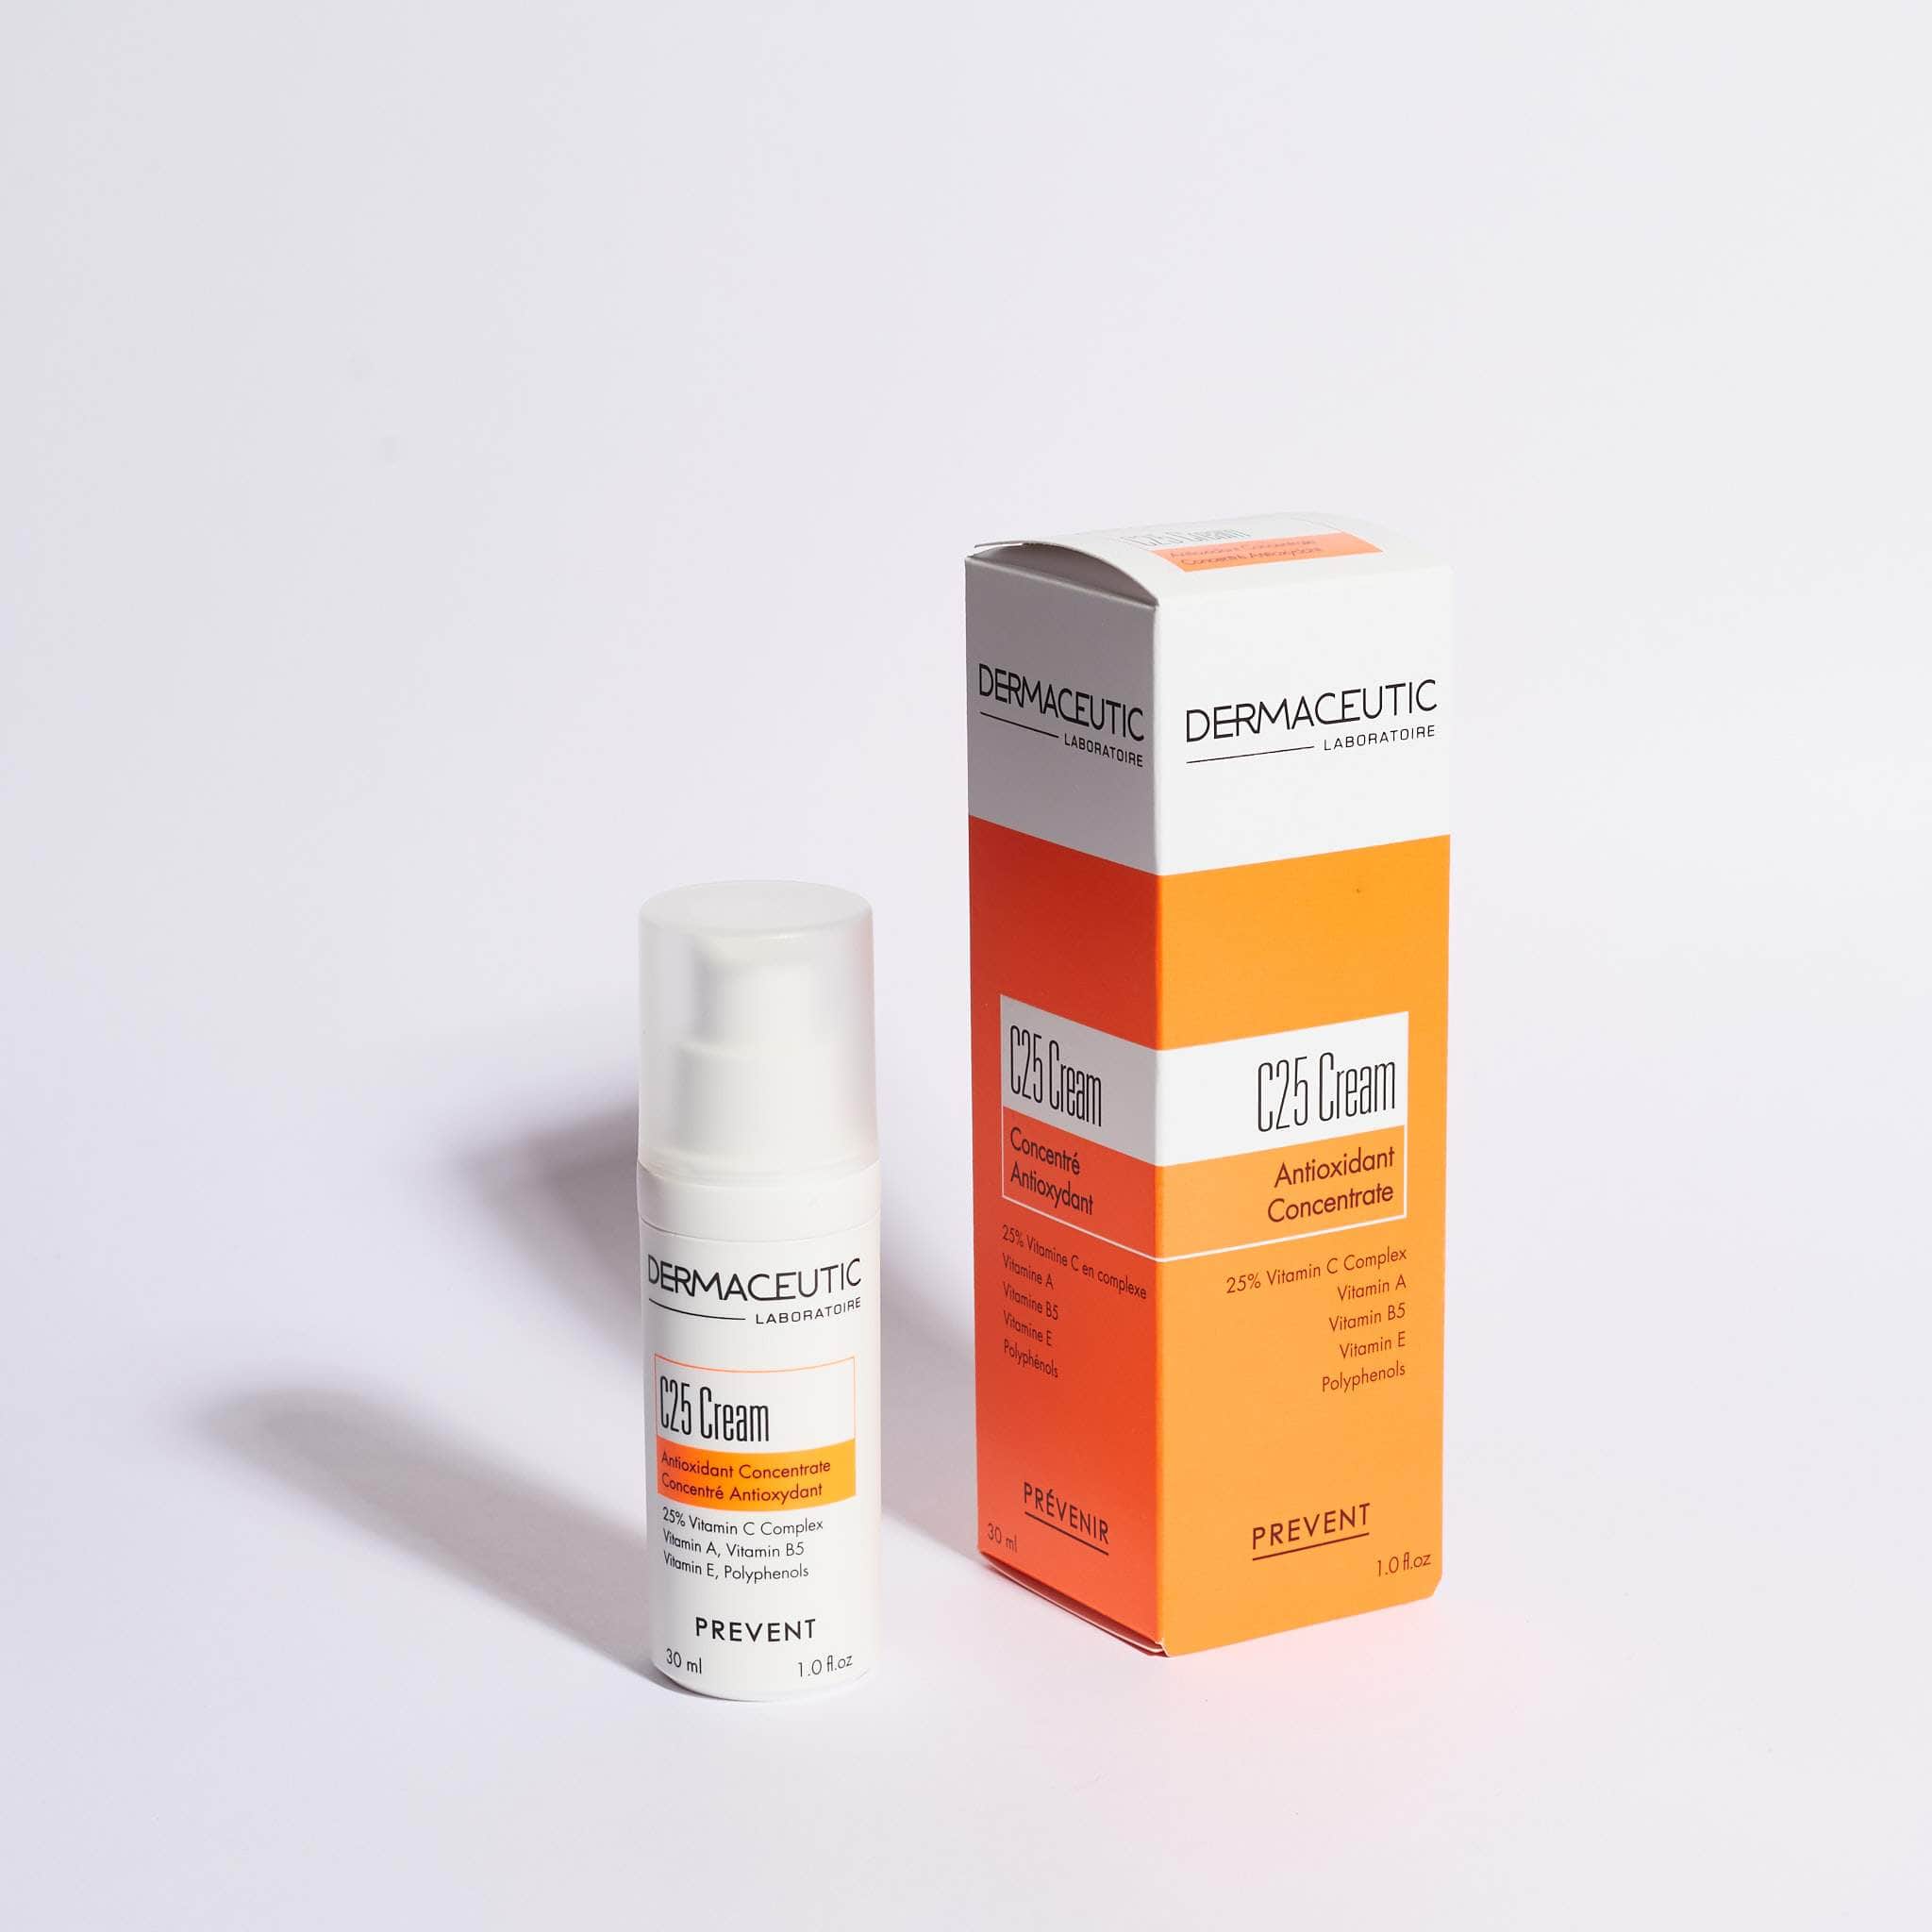 a bottle of Dermaceutic C25 Cream-30ml and its box packaging 